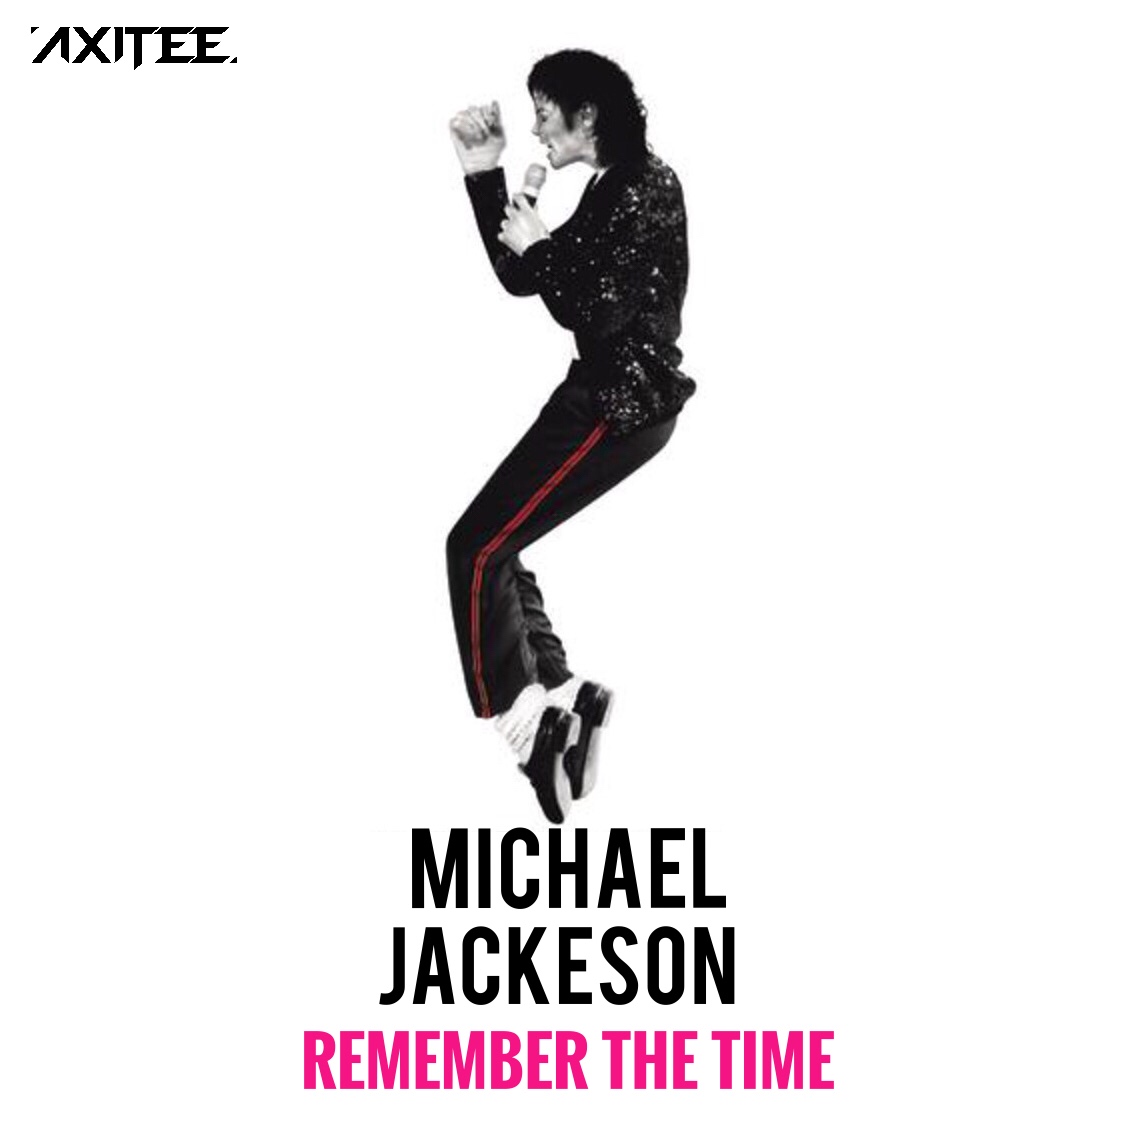 Remember The Time(AXITEE remix)